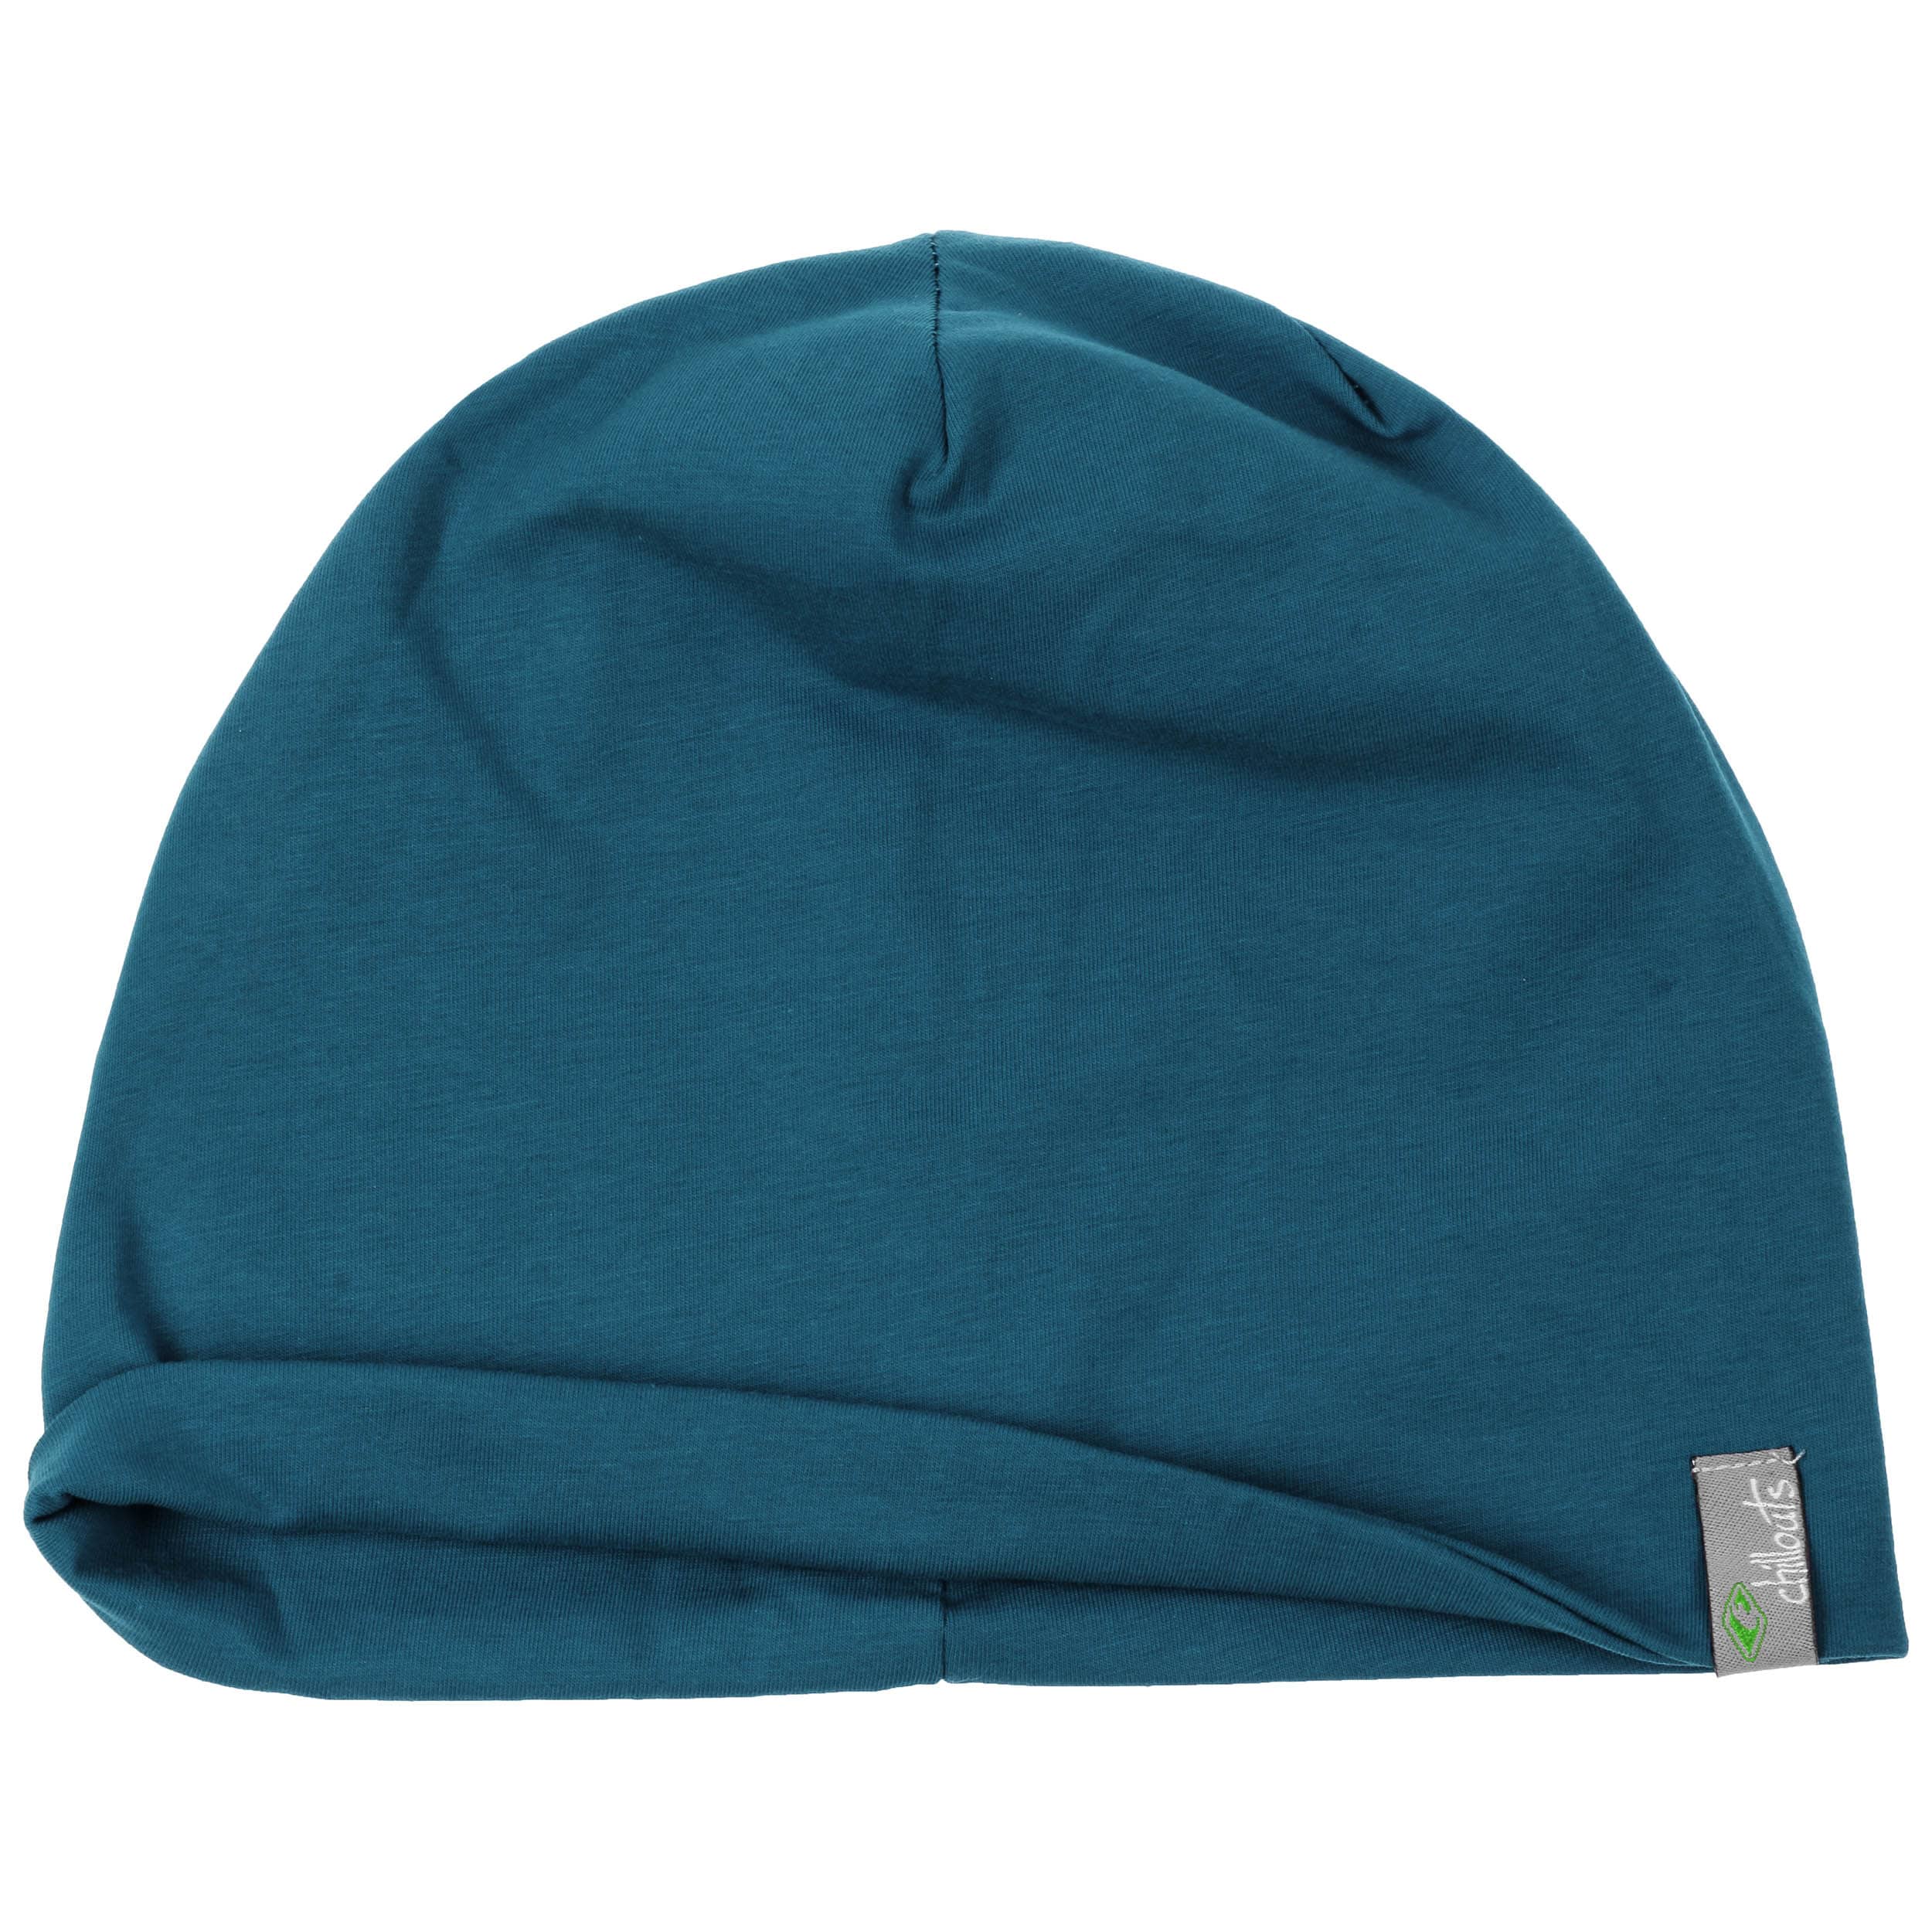 Acapulco Oversize - € 24,99 Chillouts Beanie by